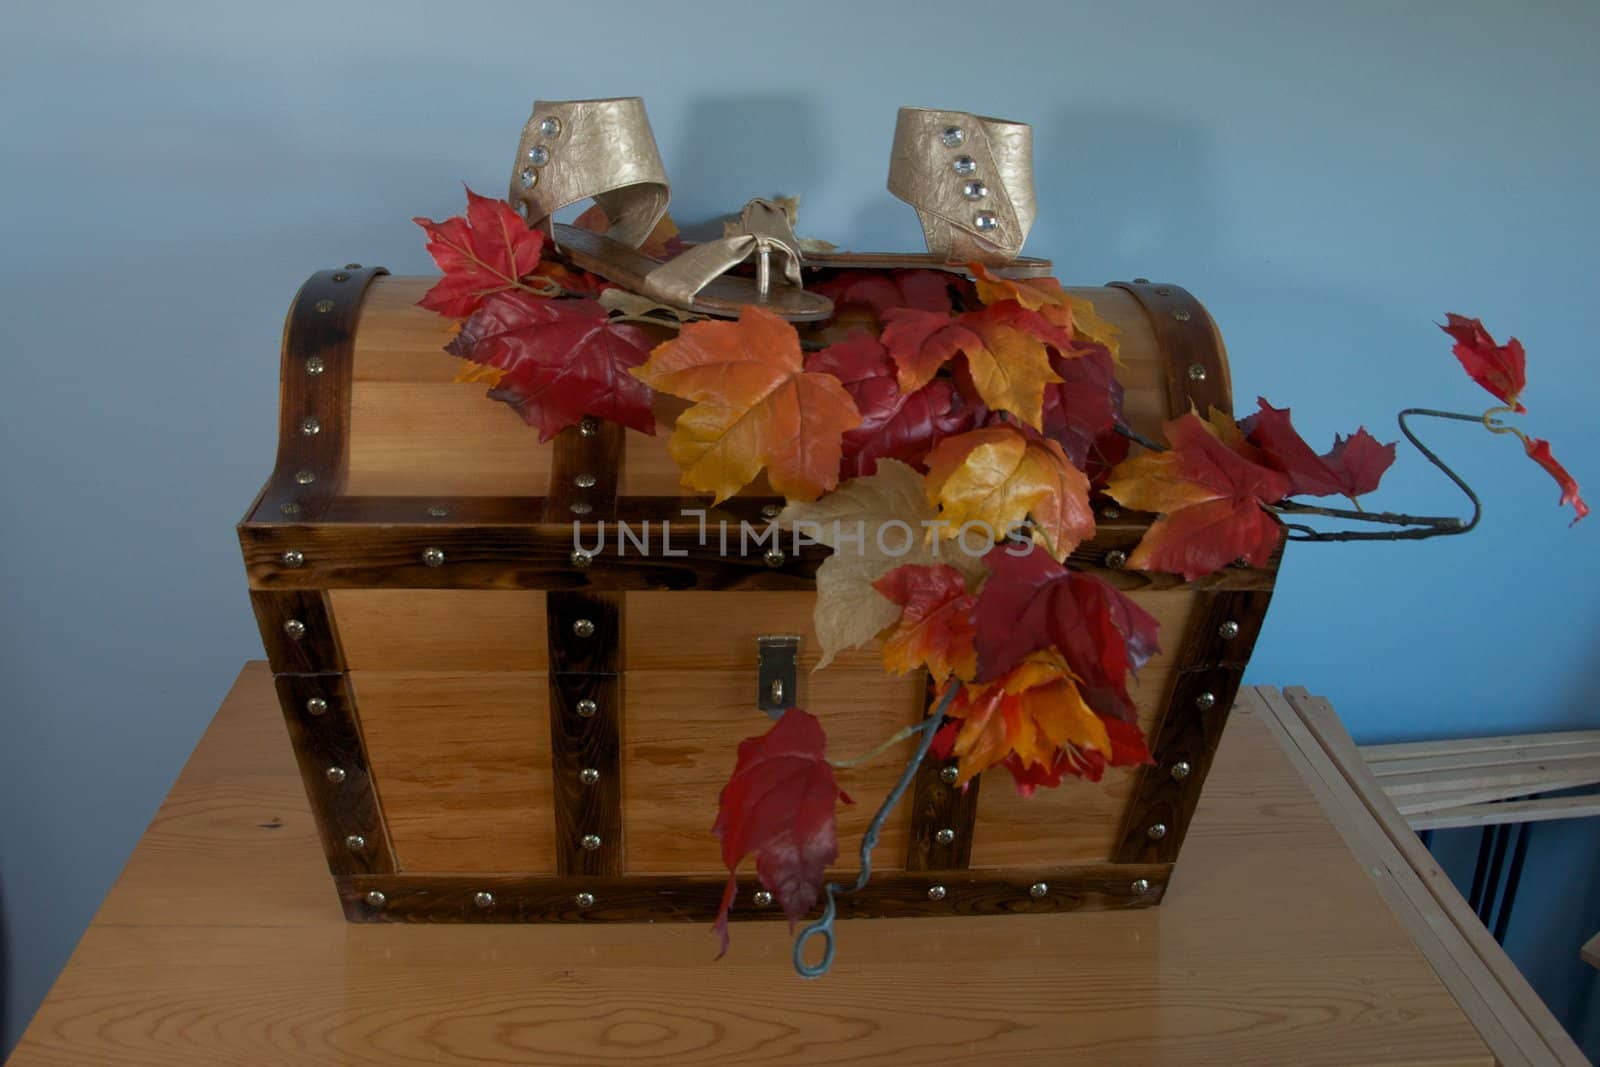 A bride's shoes for an autumn wedding, displayed on a hand-made treasure chest.